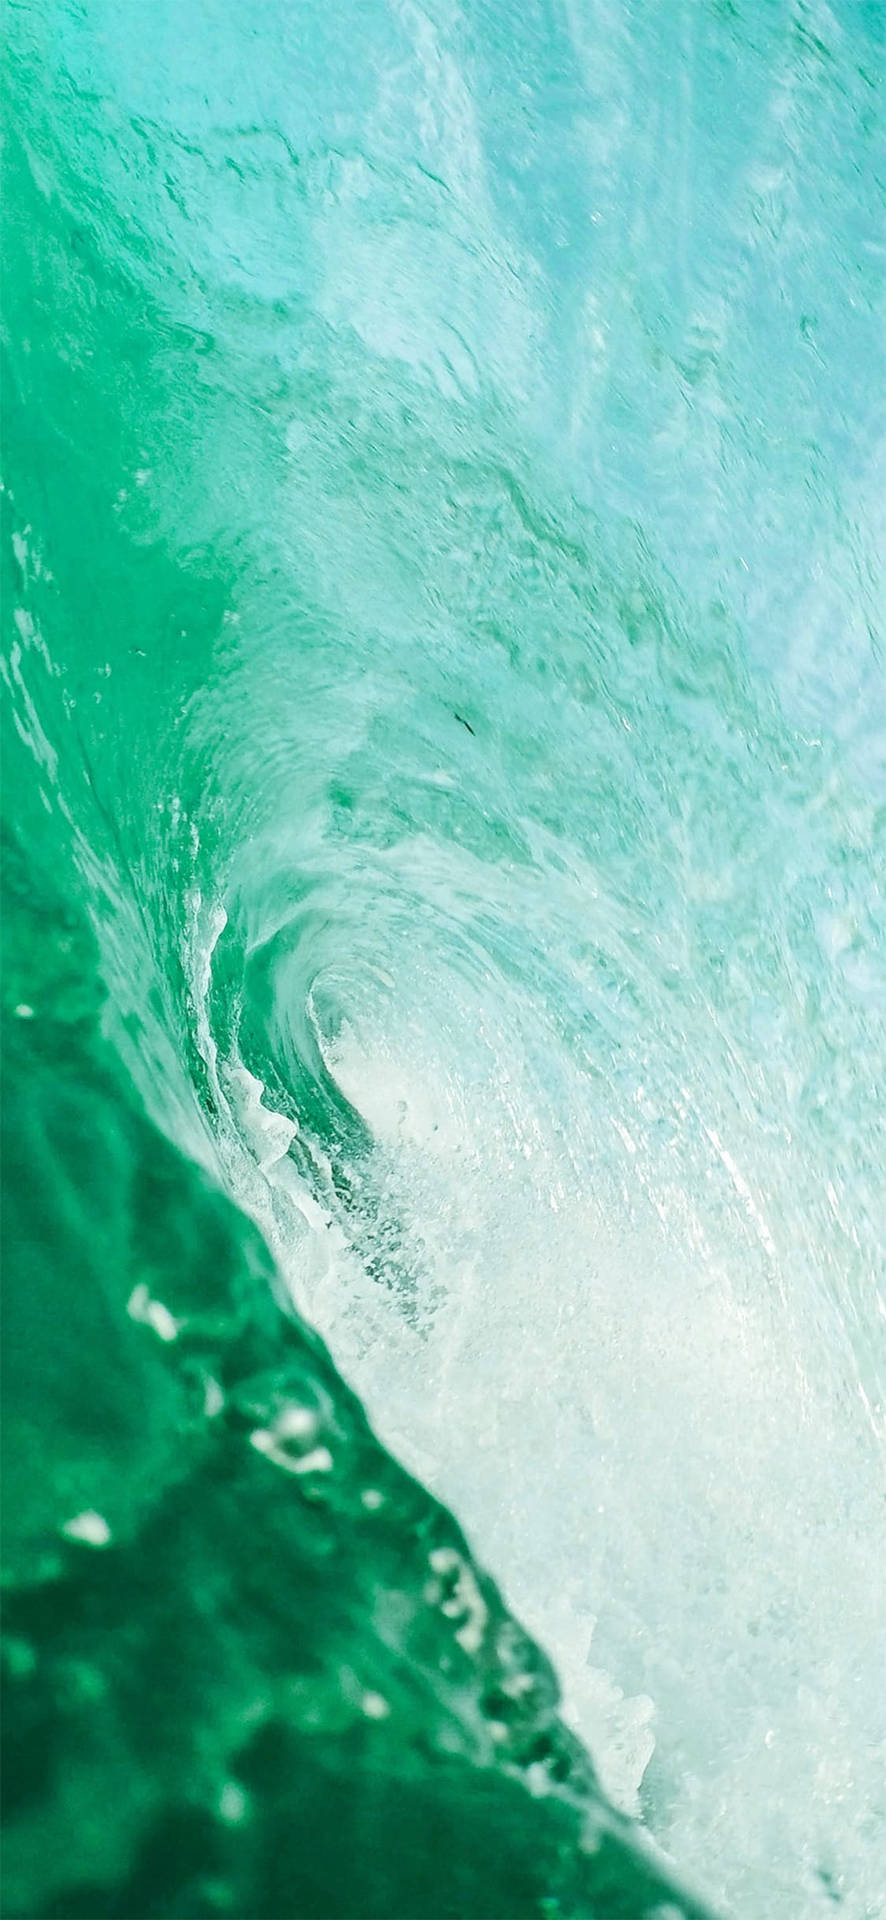 Rolling Wave Iphone 2021 Wallpaper